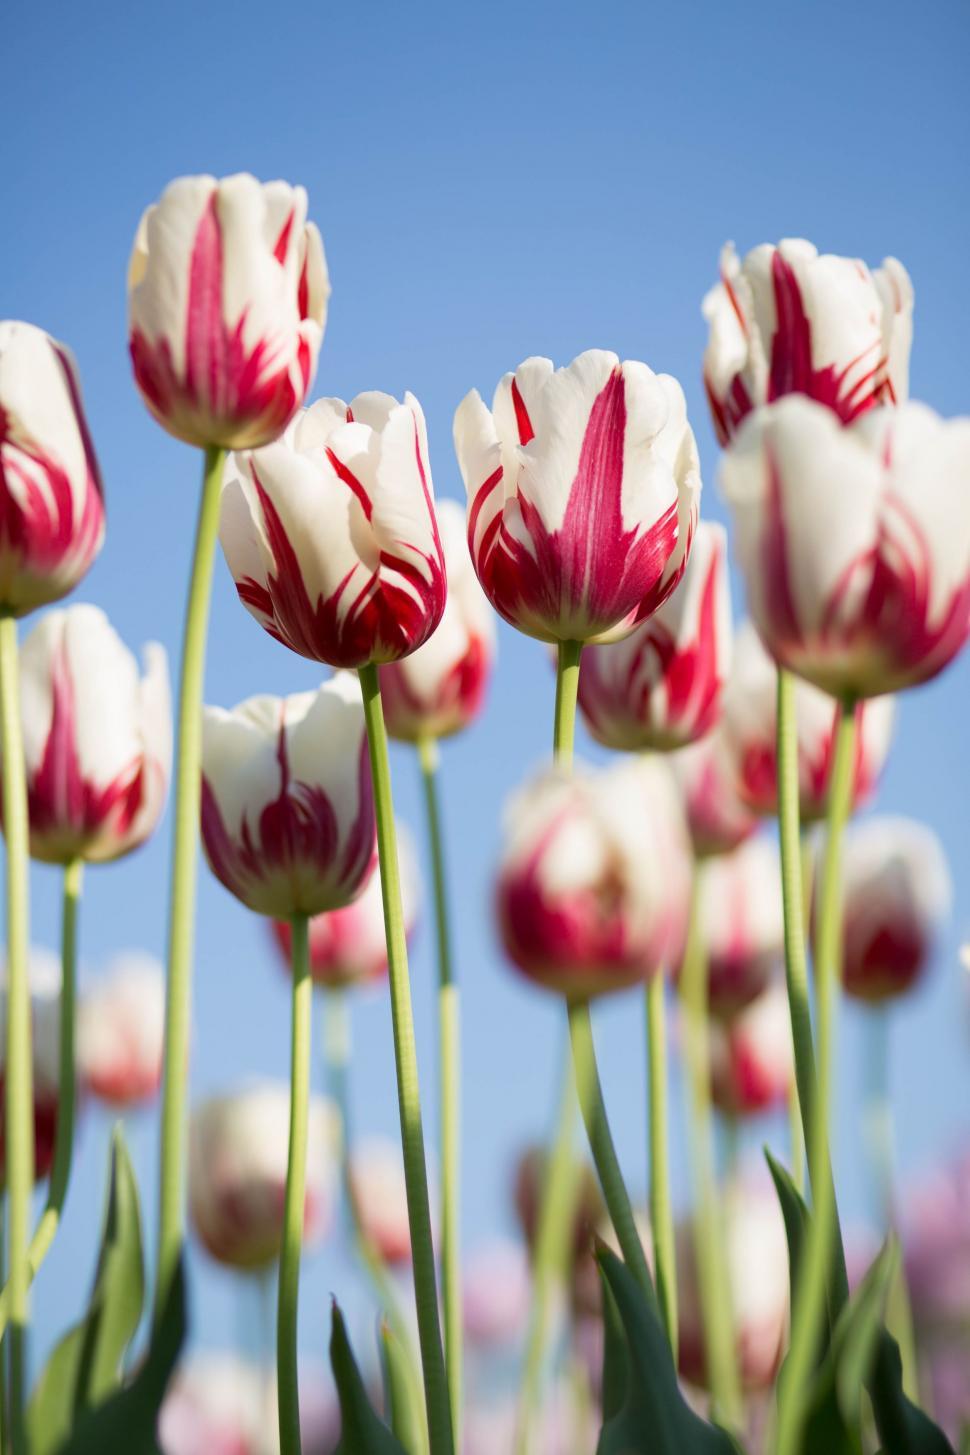 Free Image of Group of Red and White Tulips Under Blue Sky 